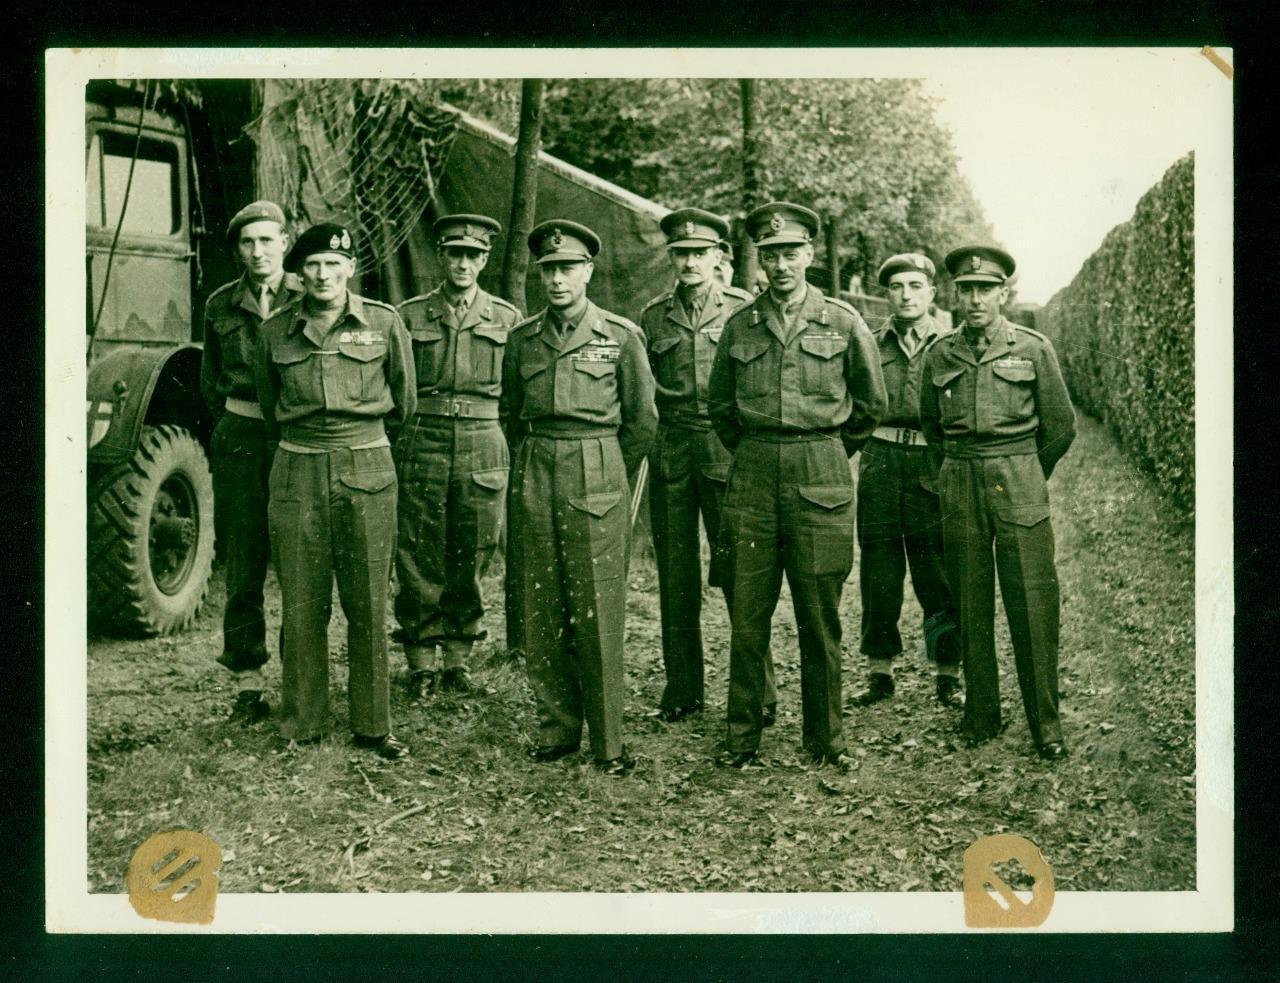 S15, 517-17, 1944, 8x6 Photo, King George VI visits British Troops in Holland